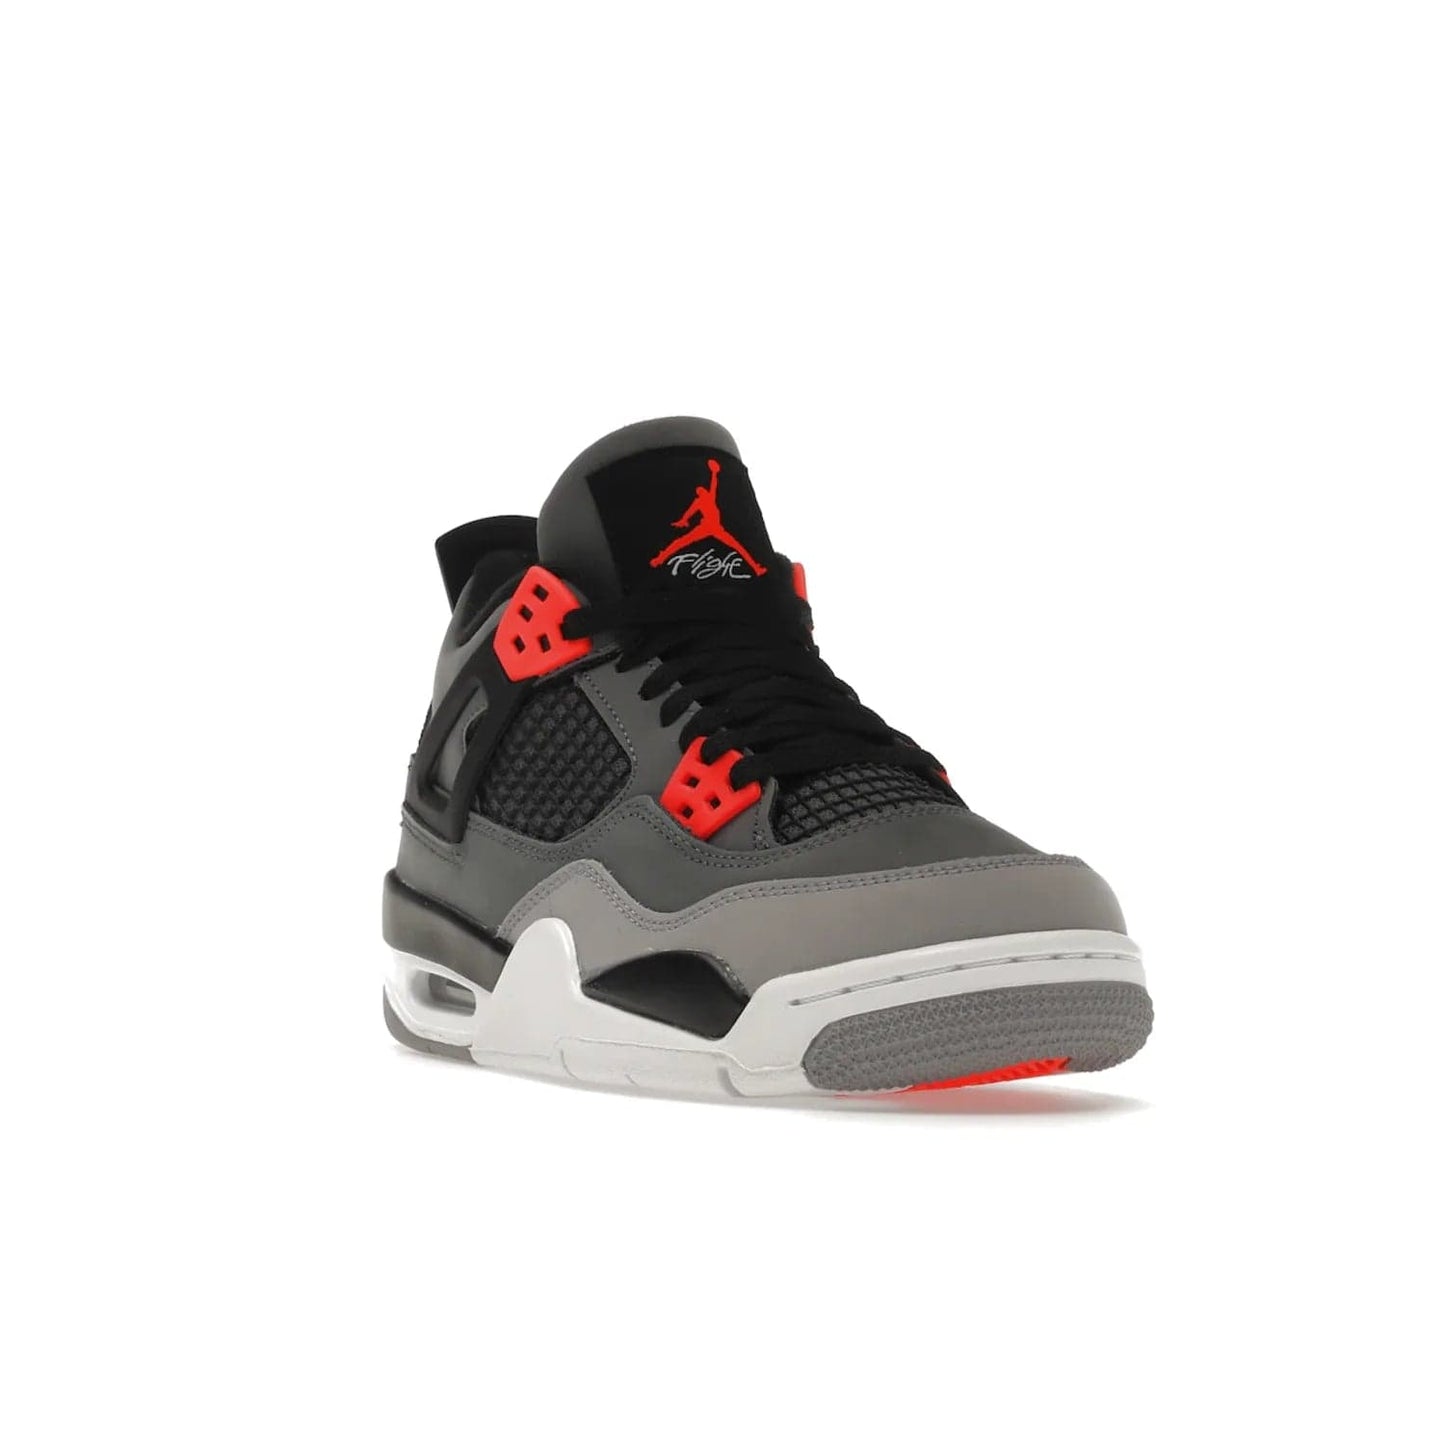 Jordan 4 Retro Infrared (GS) - Image 7 - Only at www.BallersClubKickz.com - Shop the Air Jordan 4 Retro Infrared (GS) for a classic silhouette with subtle yet bold features. Dark grey nubuck upper with lighter forefoot overlay, black accents, Infrared molded eyelets & woven tongue tag. Available June 2022.